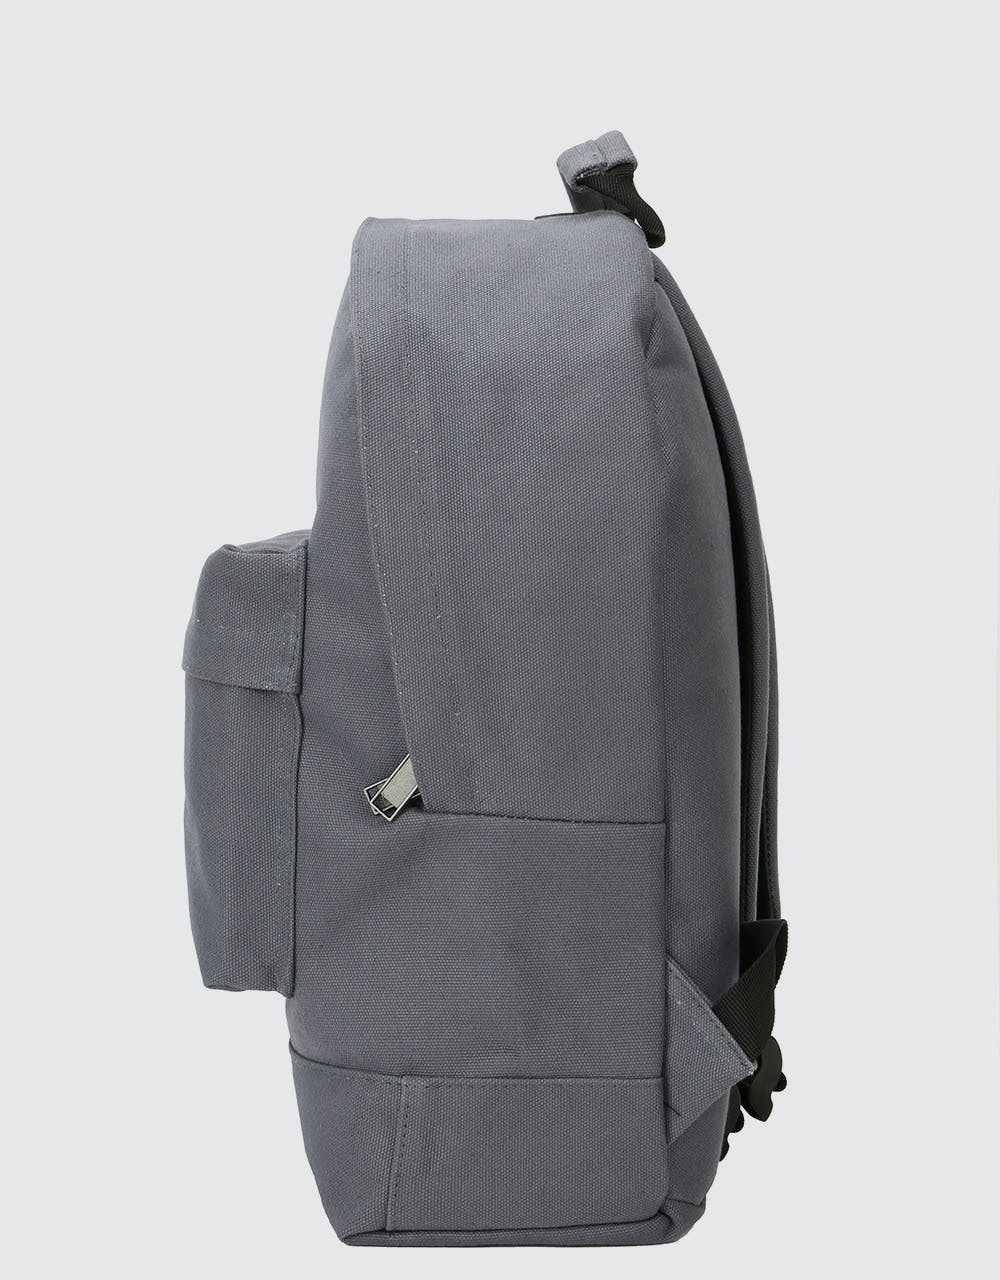 Mi-Pac Canvas Backpack - Charcoal